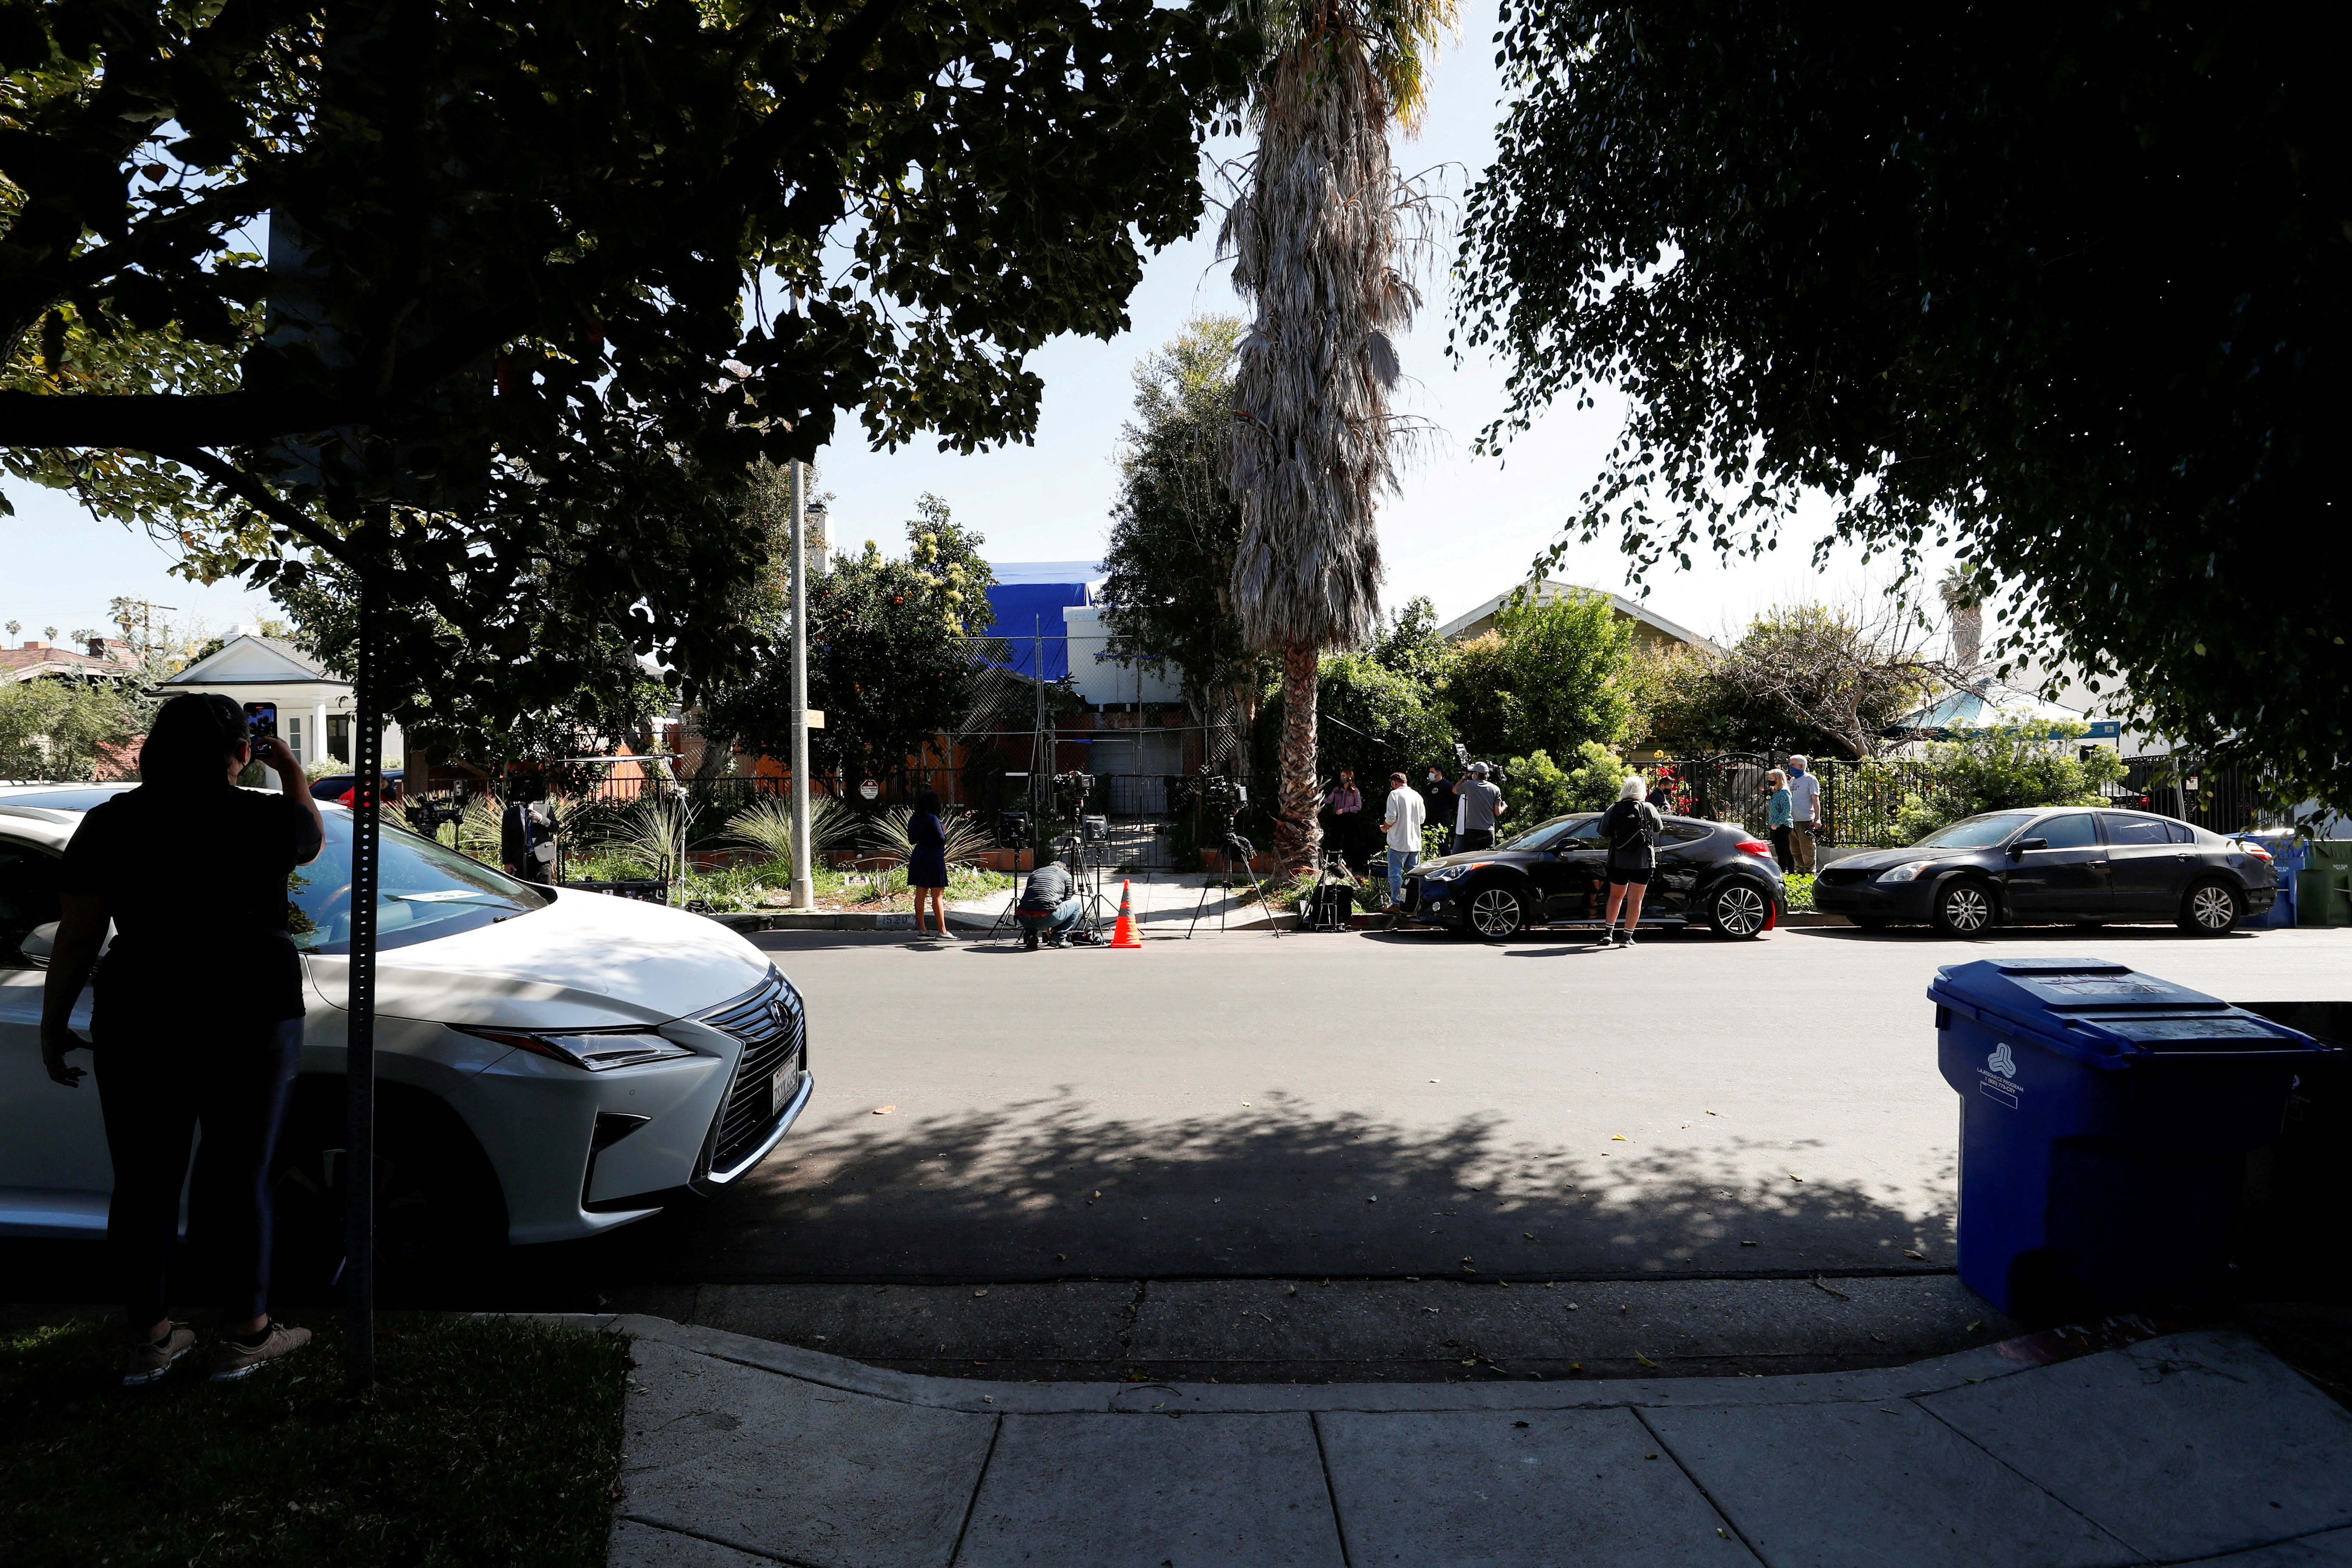 A view of the site where Lady Gaga's dog walker was shot and two of her dogs were stolen in Los Angeles, California, U.S., on February 25, 2021. REUTERS/Mario Anzuoni/File Photo